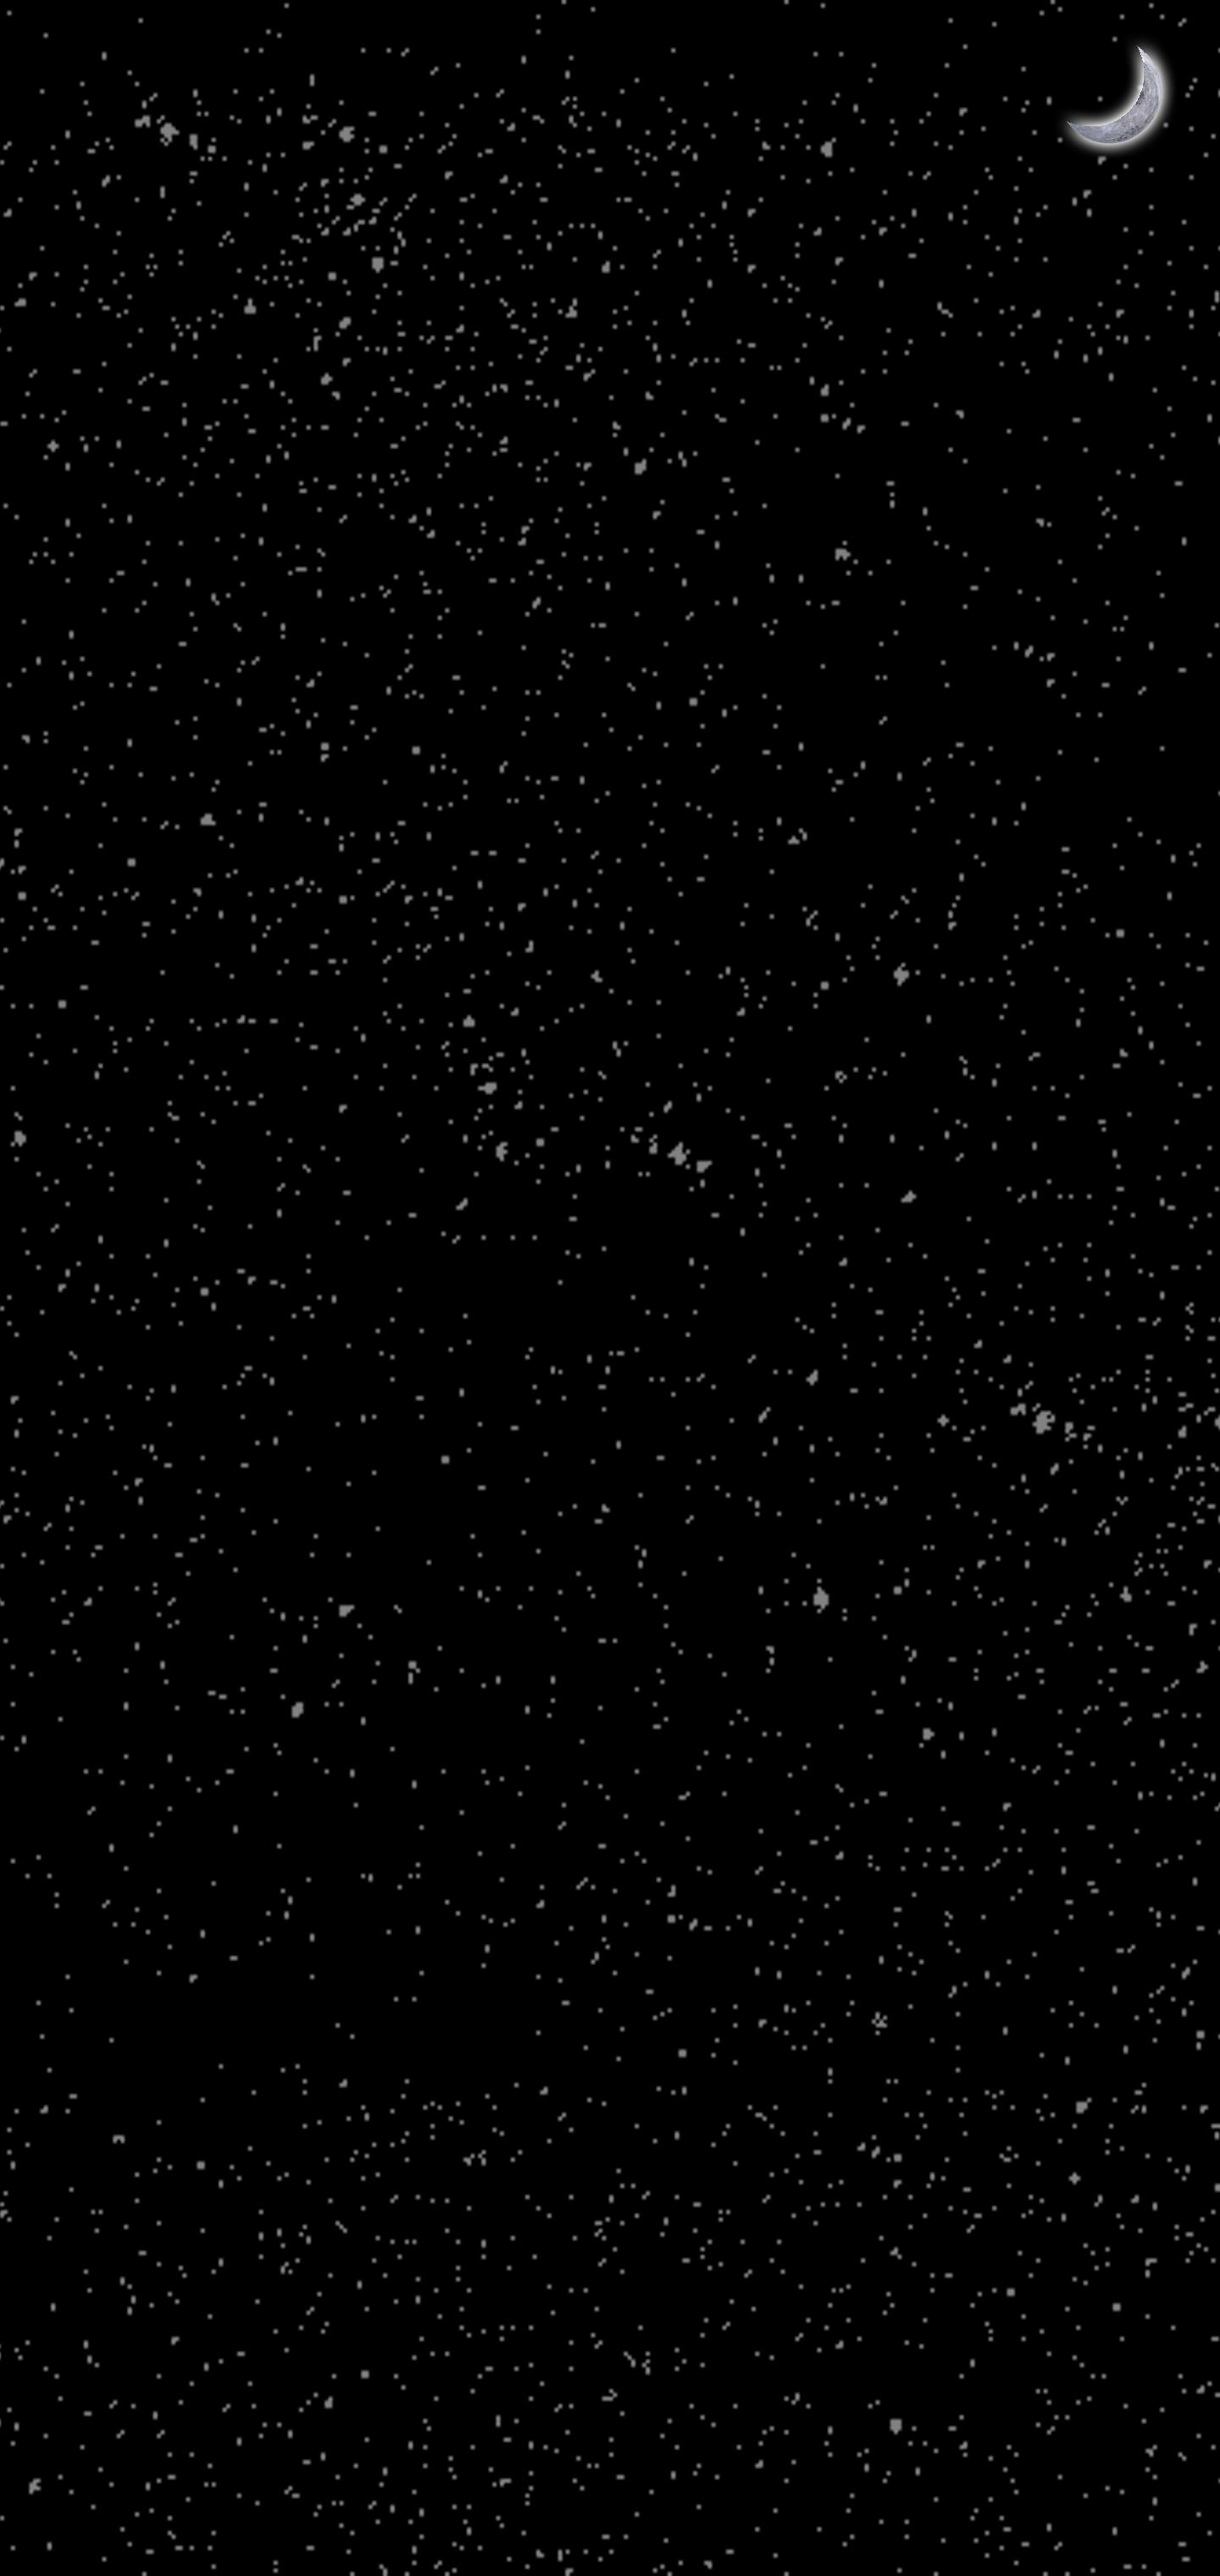 1440x3040 Starry Sky by SpicyIcarus Galaxy S10 Hole-Punch Wallpaper